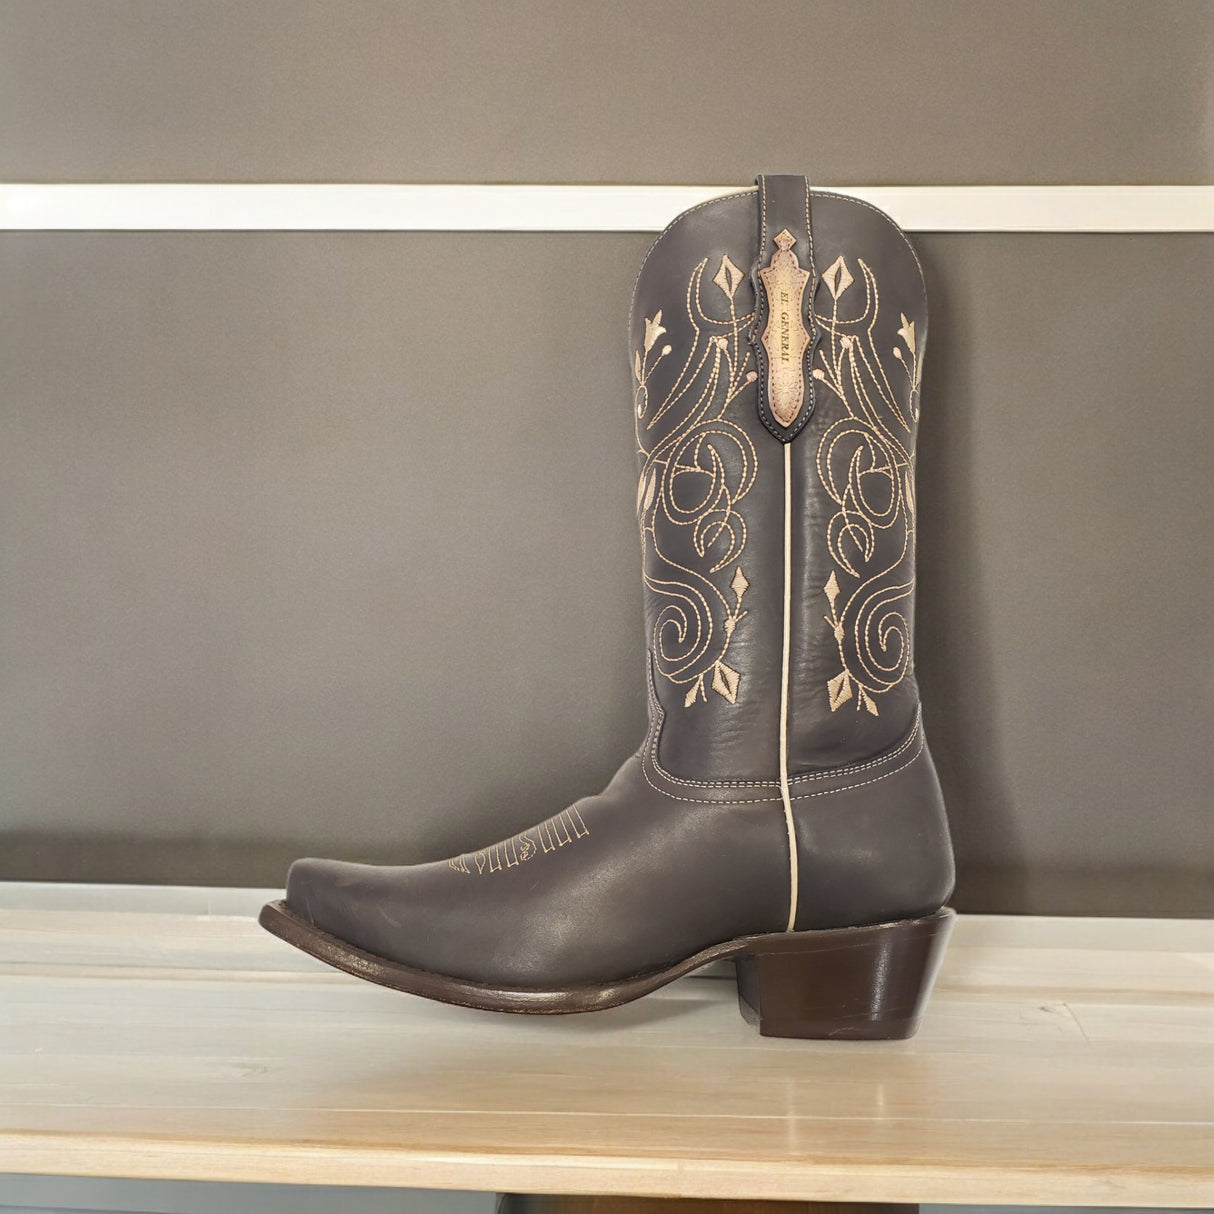 Limited Edition Genuine Leather Cowboy Boots for Women 'El General' *CHOCOLATE-34511* - BELLEZA'S - Limited Edition Genuine Leather Cowboy Boots for Women 'El General' *CHOCOLATE-34511* - Botas Para Damas - 34511 5